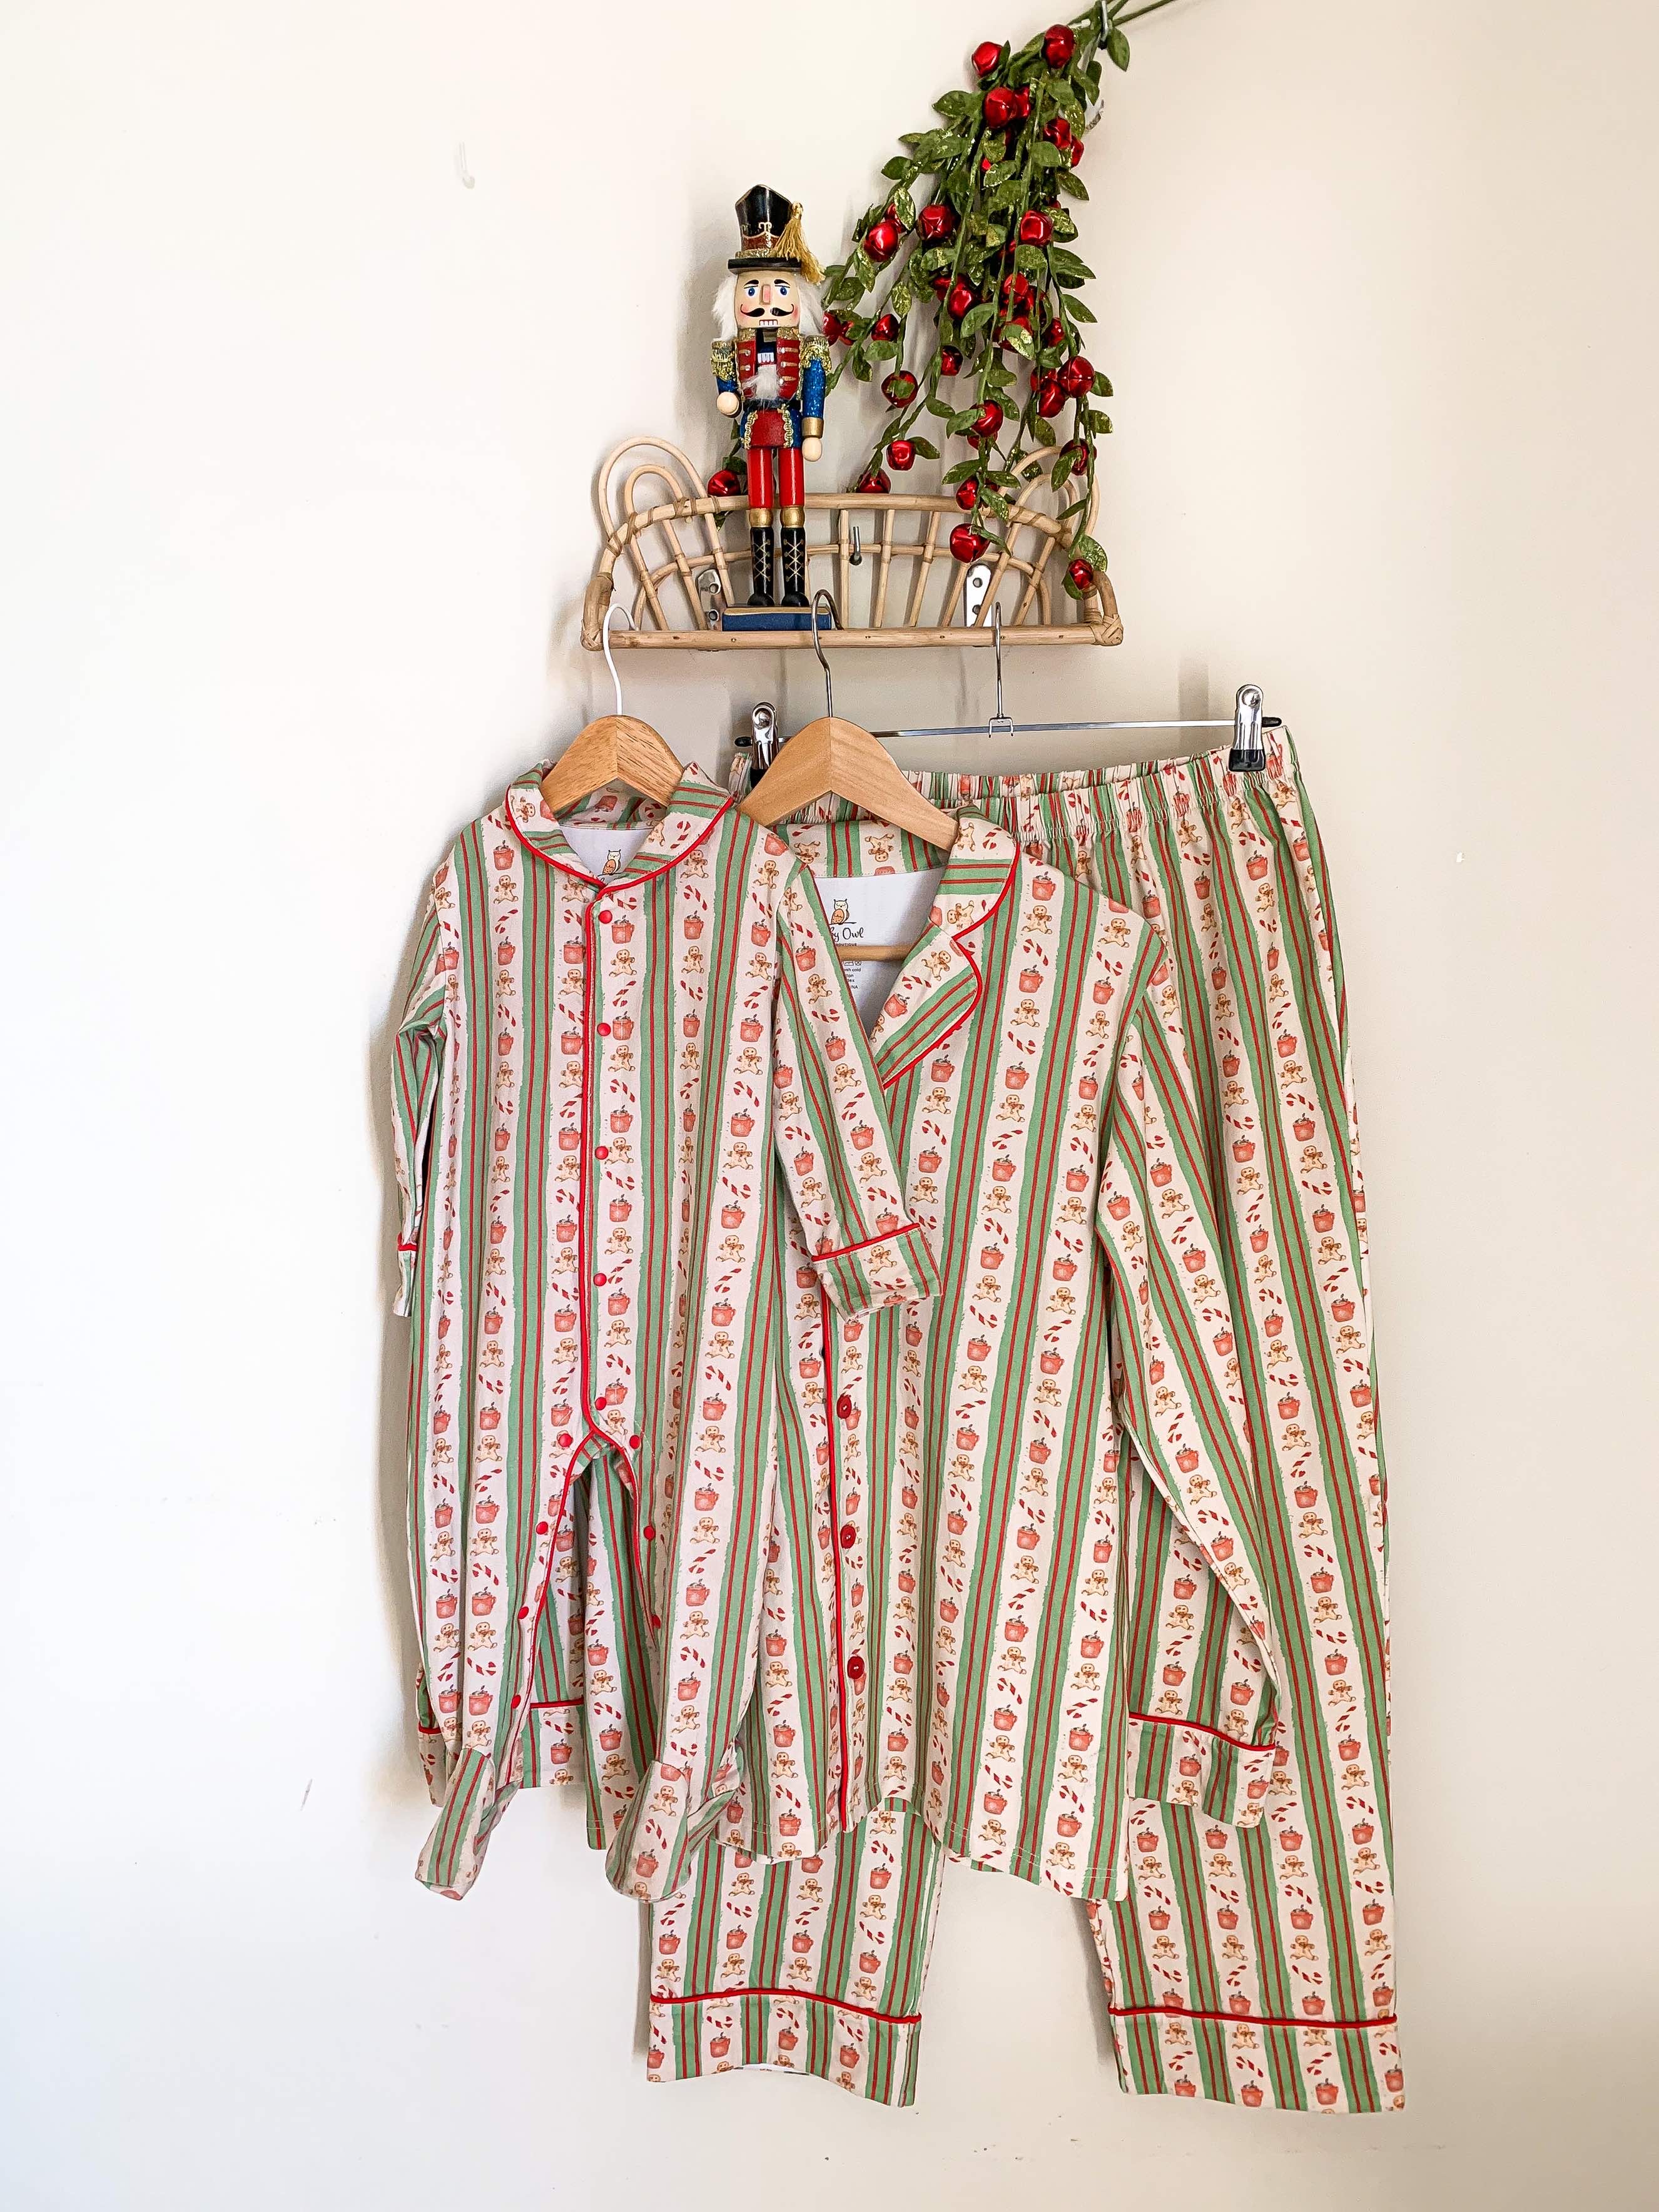 pyjamas hanging from a rattan shelf for kids and adults. the pyjama pattern ids red and green stripes with images of hot chocolate, candy canes and gingerbread.